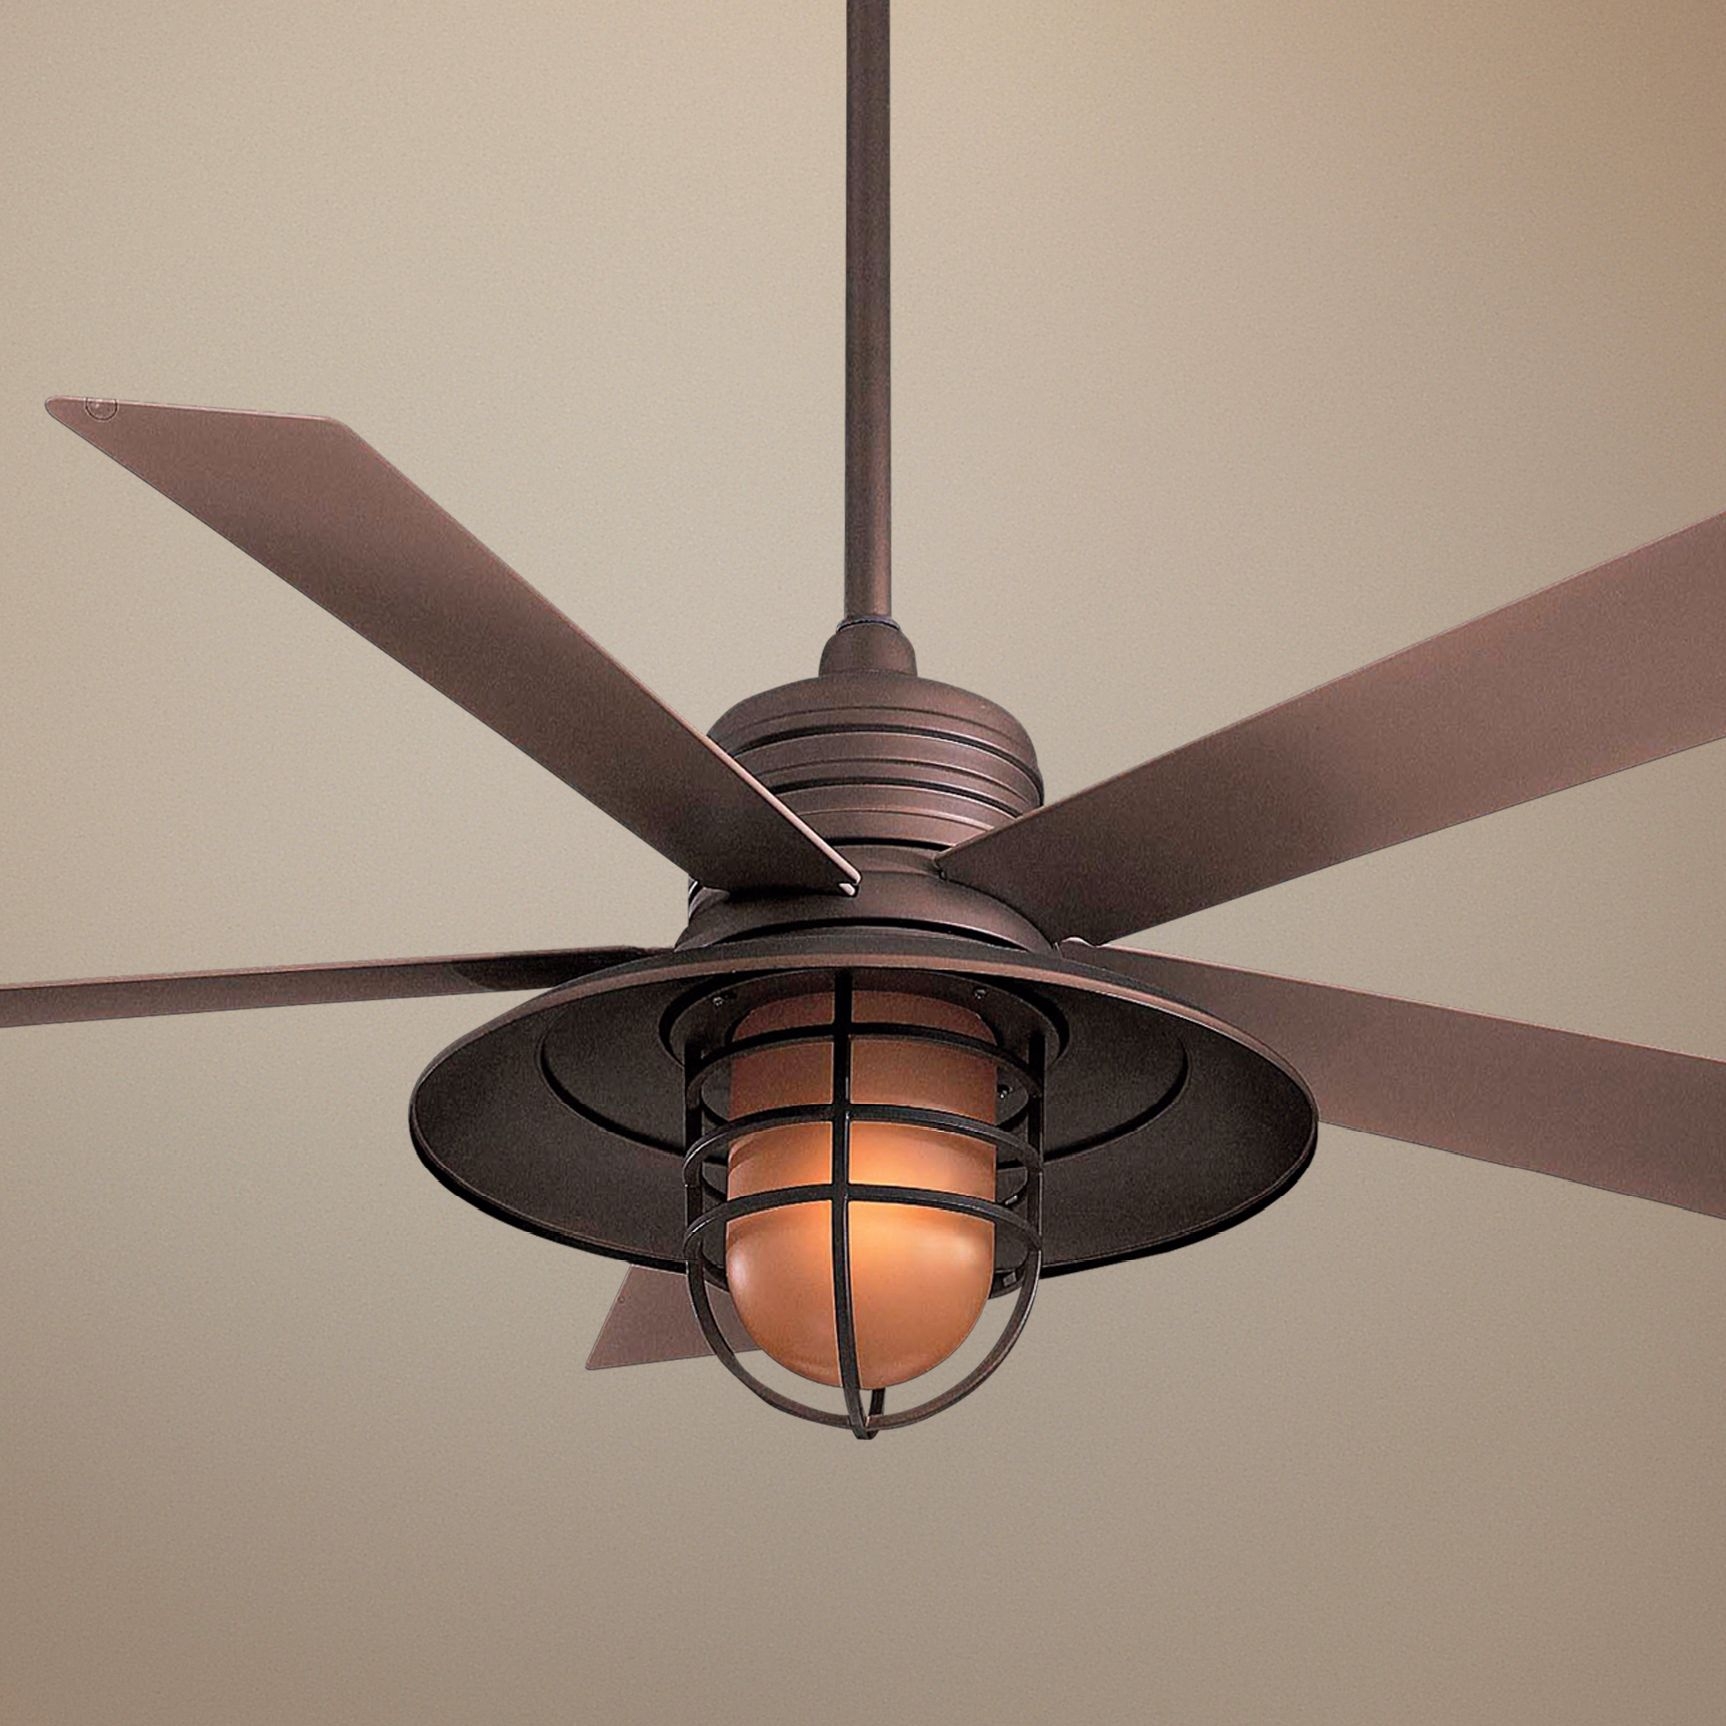 Permalink to Antique Style Ceiling Fan With Light